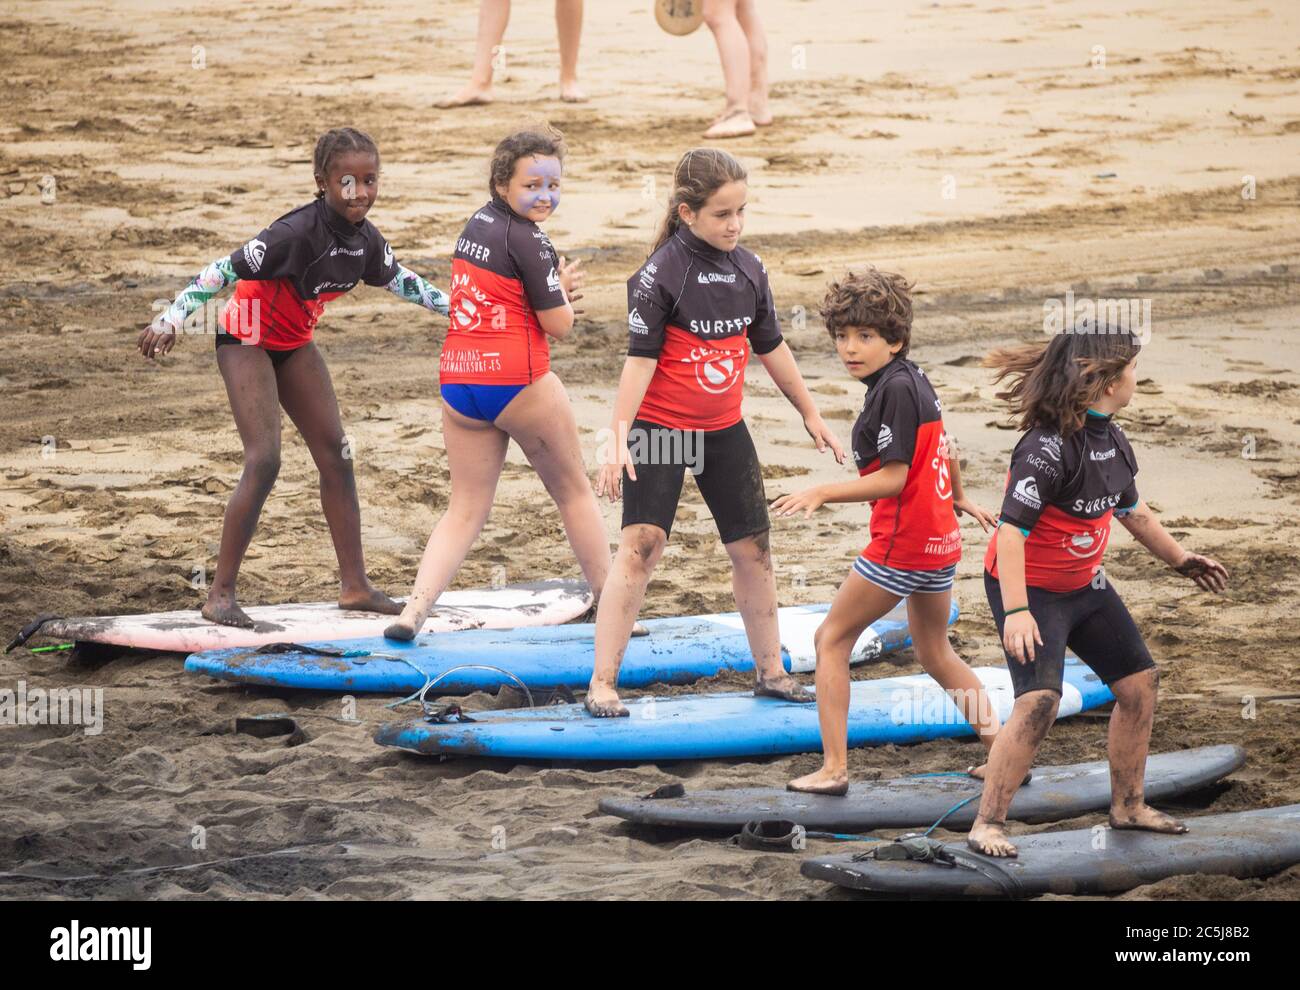 Las Palmas, Gran Canaria, Canary Islands, Spain. 3rd July, 2020.  Schoolchildren at summer surf camp on the city beach in Las Palmas on Gran  Canaria. With major tour operators from the UK